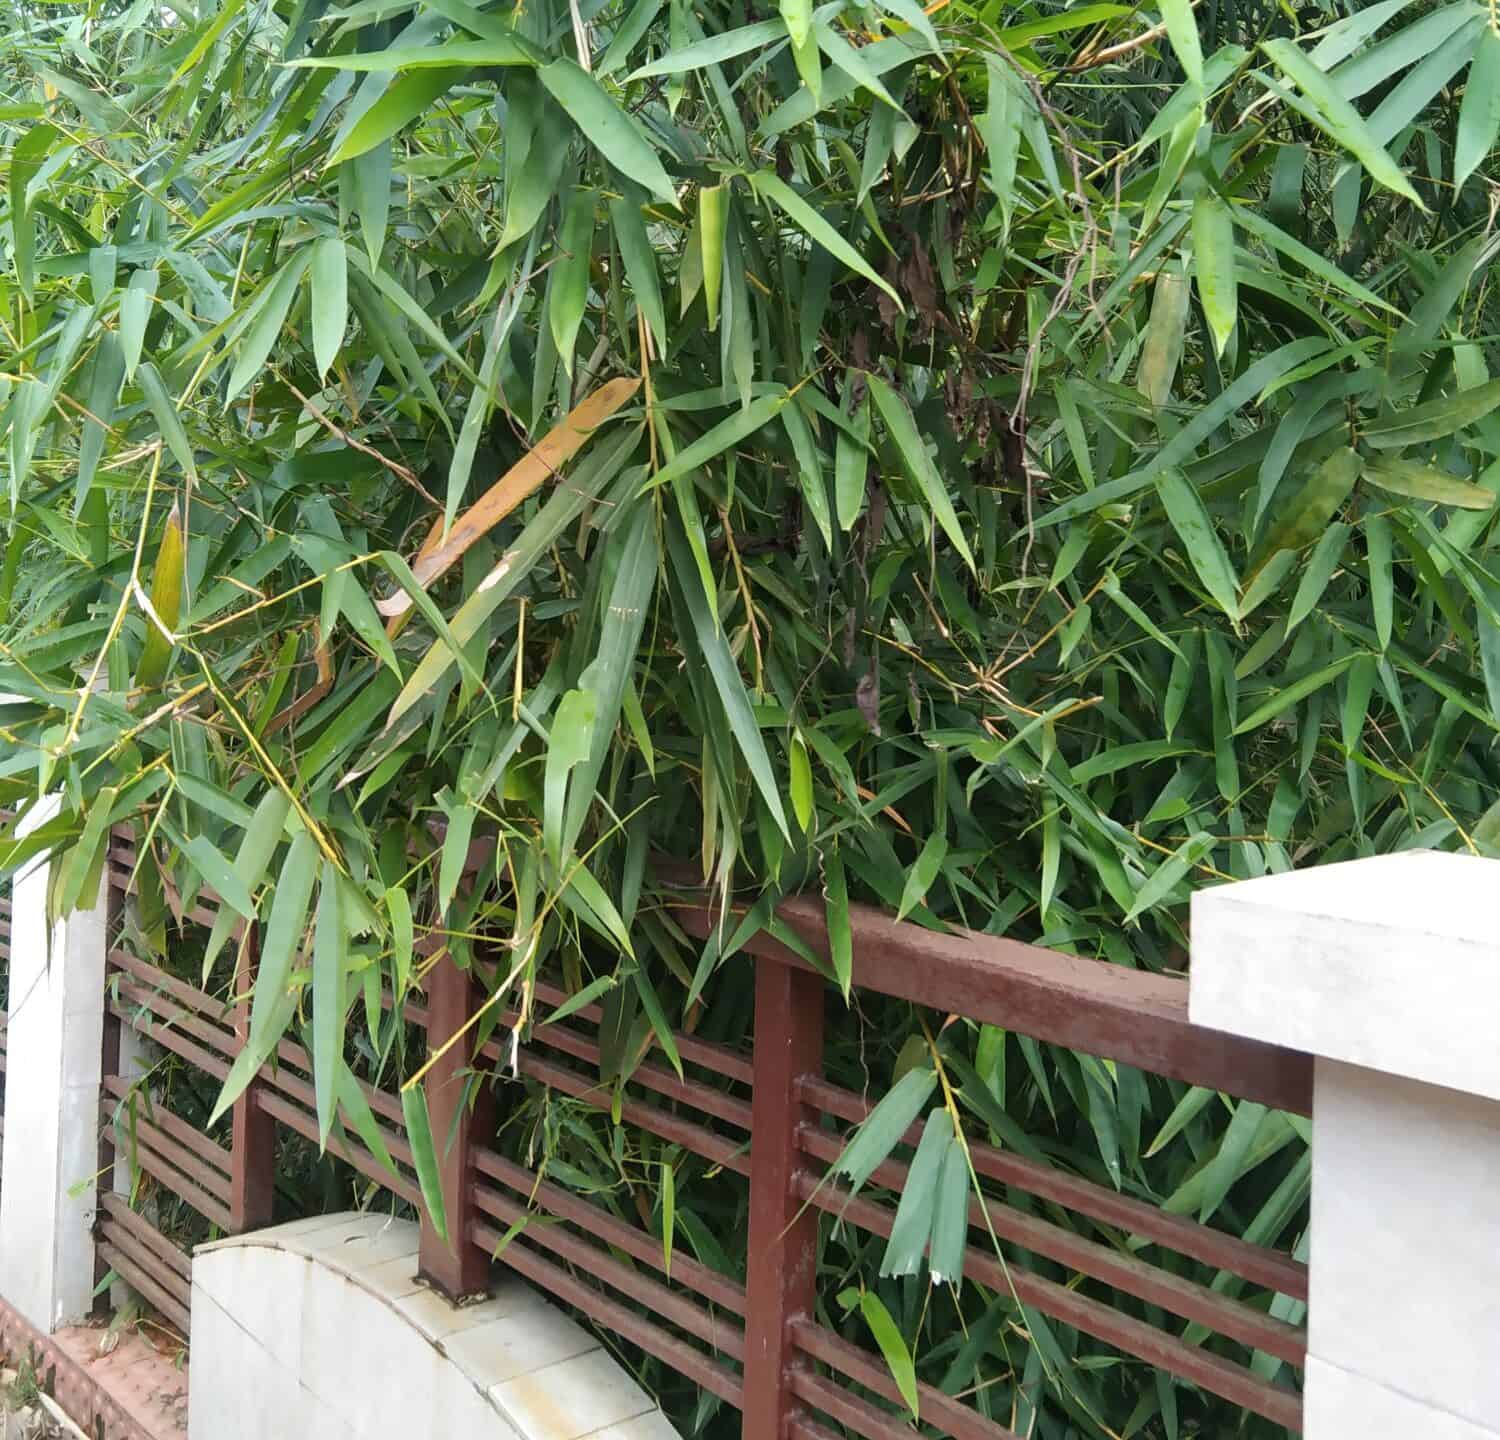 Pseudosasa japonica, the arrow bamboo or metake,is a species of flowering plant in the grass family Poaceae, native to Japan and Korea.